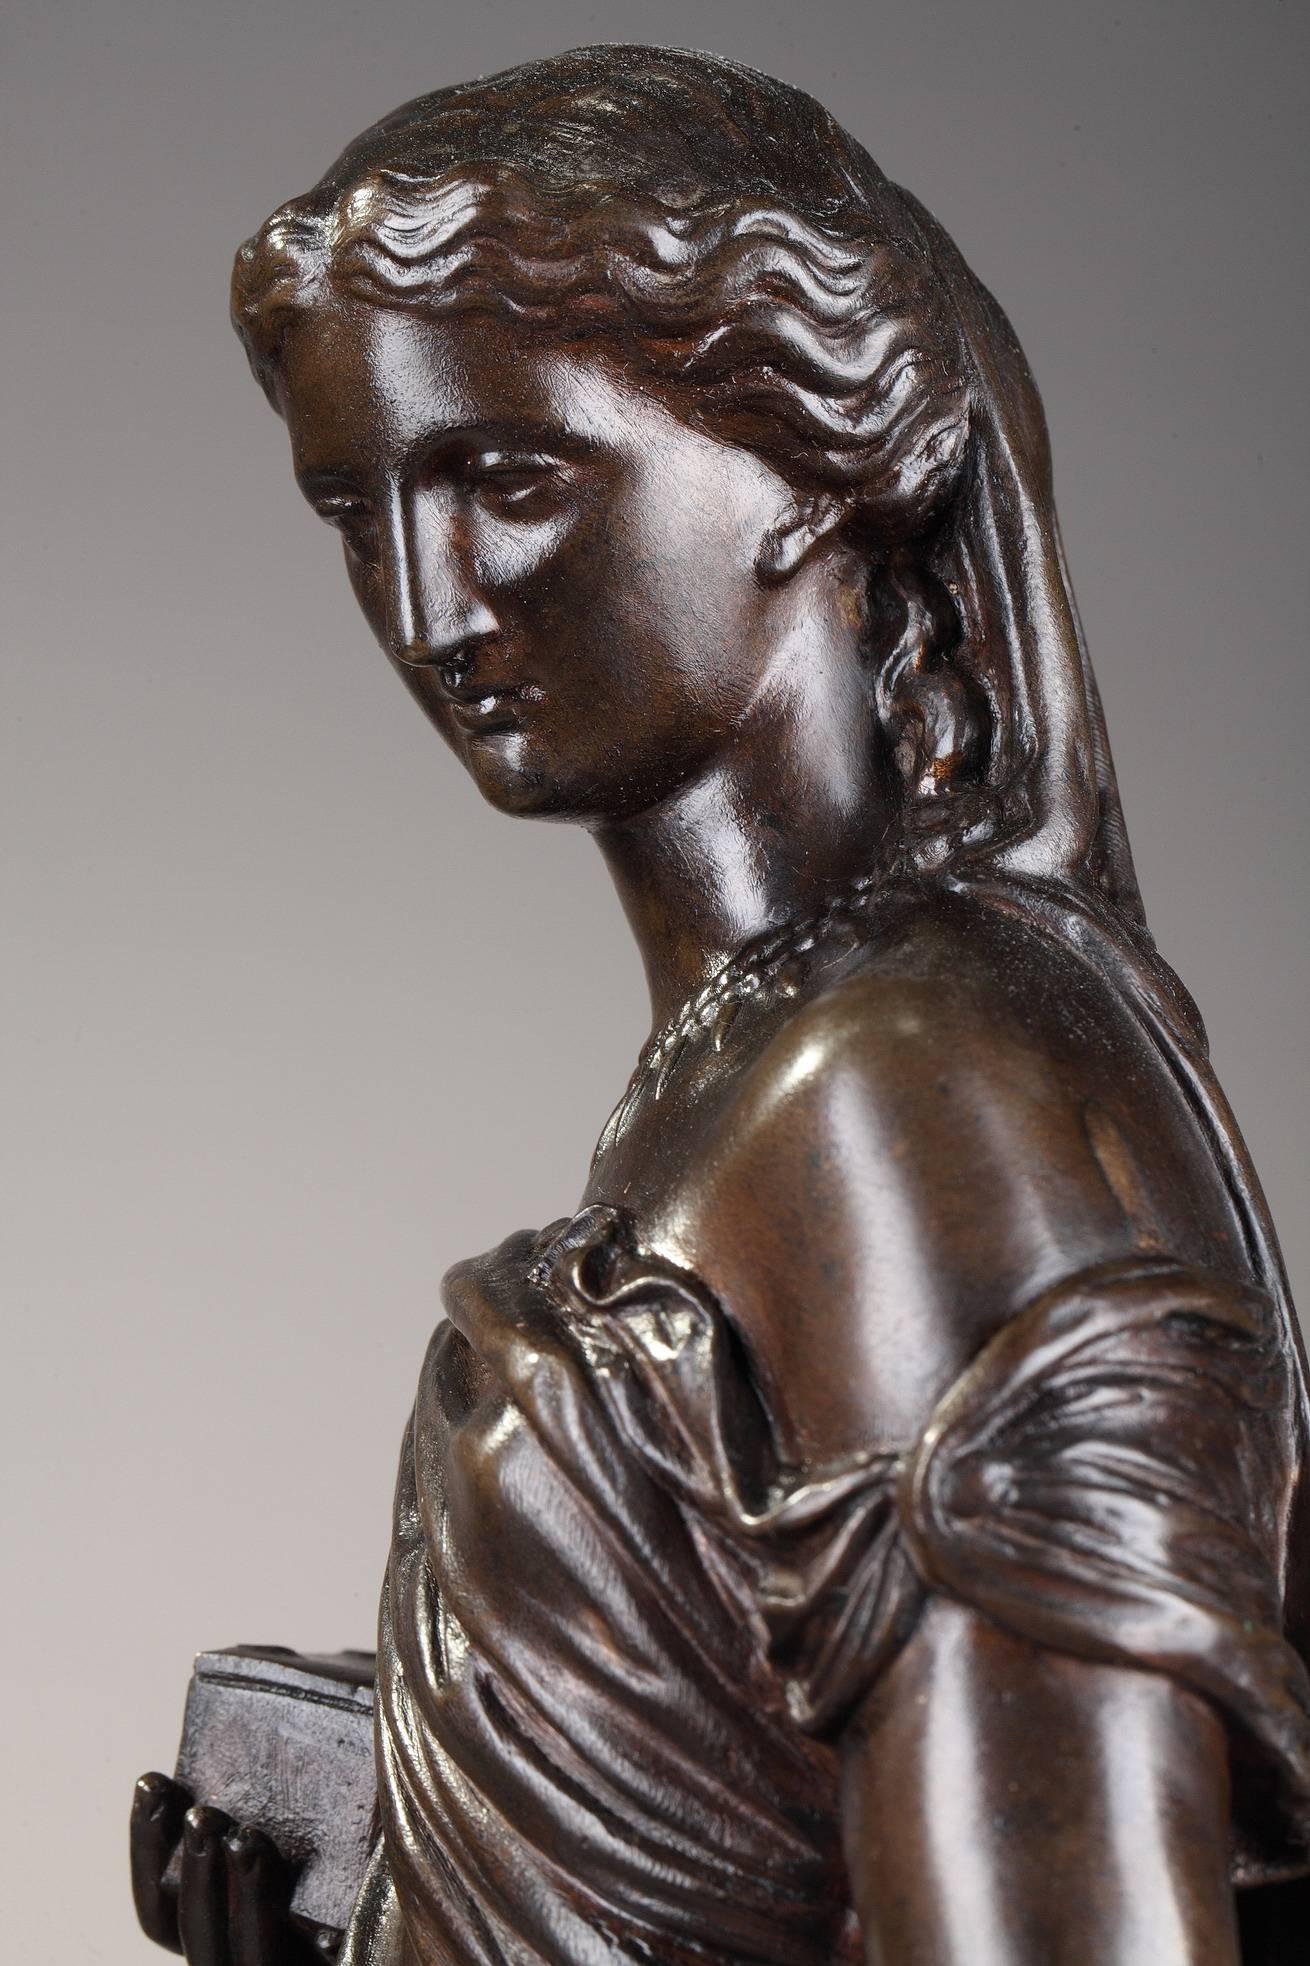 19th century patinated bronze statue by Eugène-Antoine Aizelin (French, 1821-1902). It features Pandora in a standing pose wearing a flowing robe, holding a box close to her chest. Signed on the base: Ene AIZELIN Fit. Ferdinand BARBEDIENNE mark.